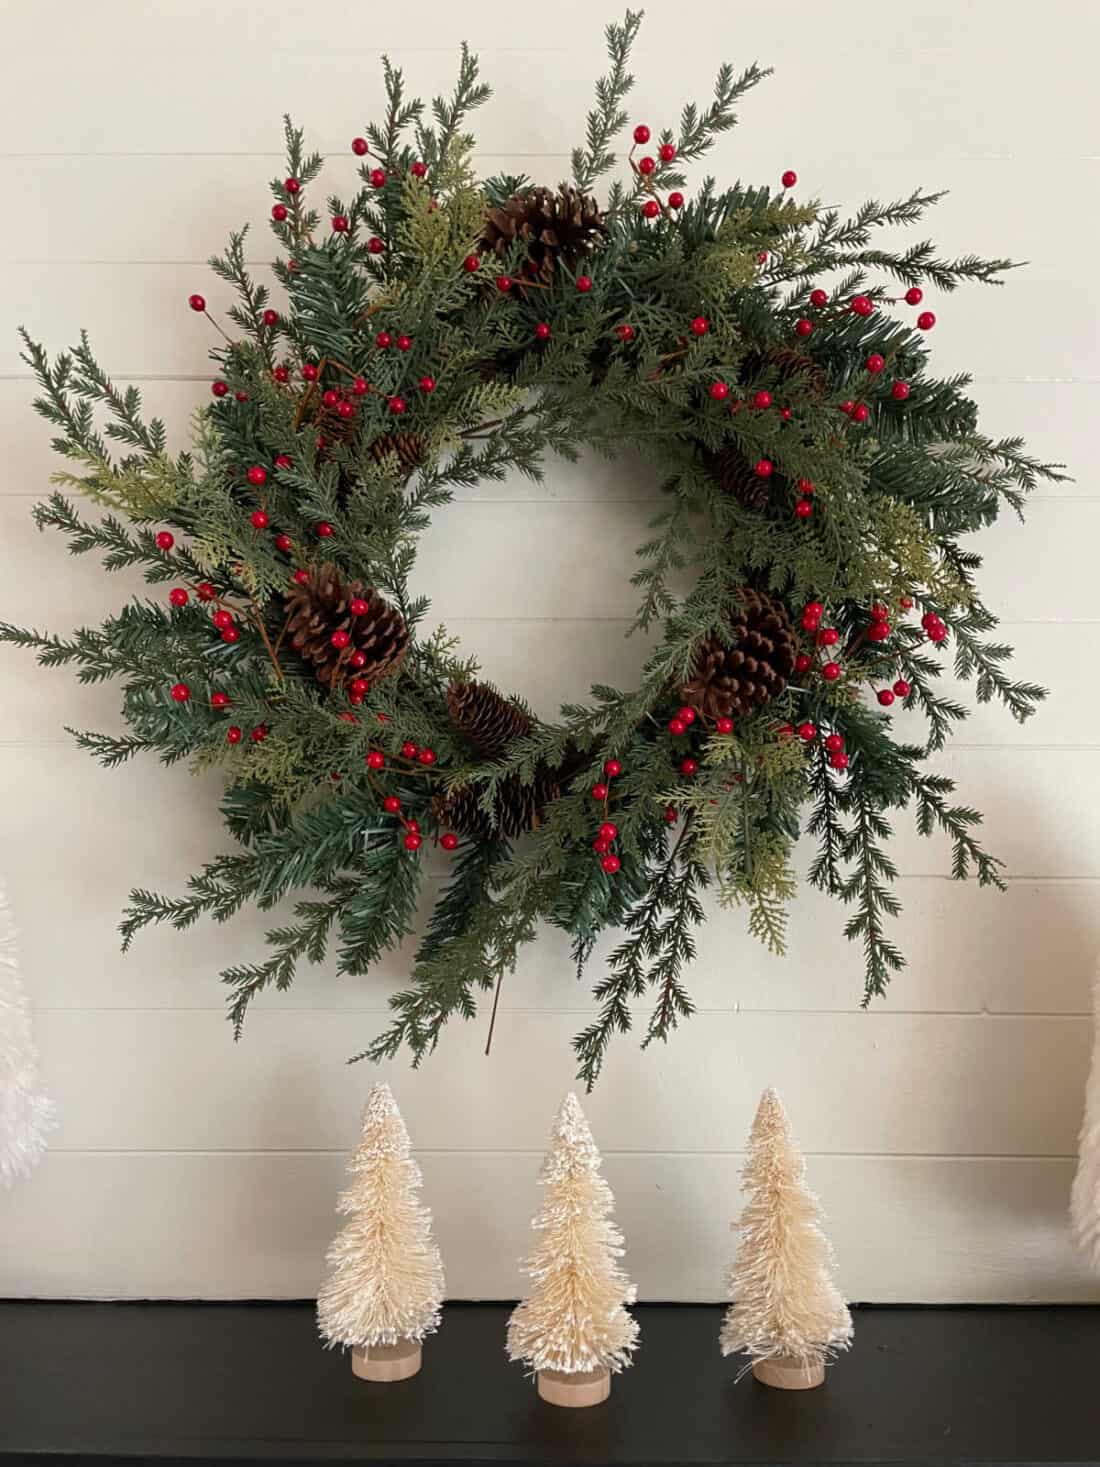 Christmas Greenery Decorating Ideas - At Home With The Barkers